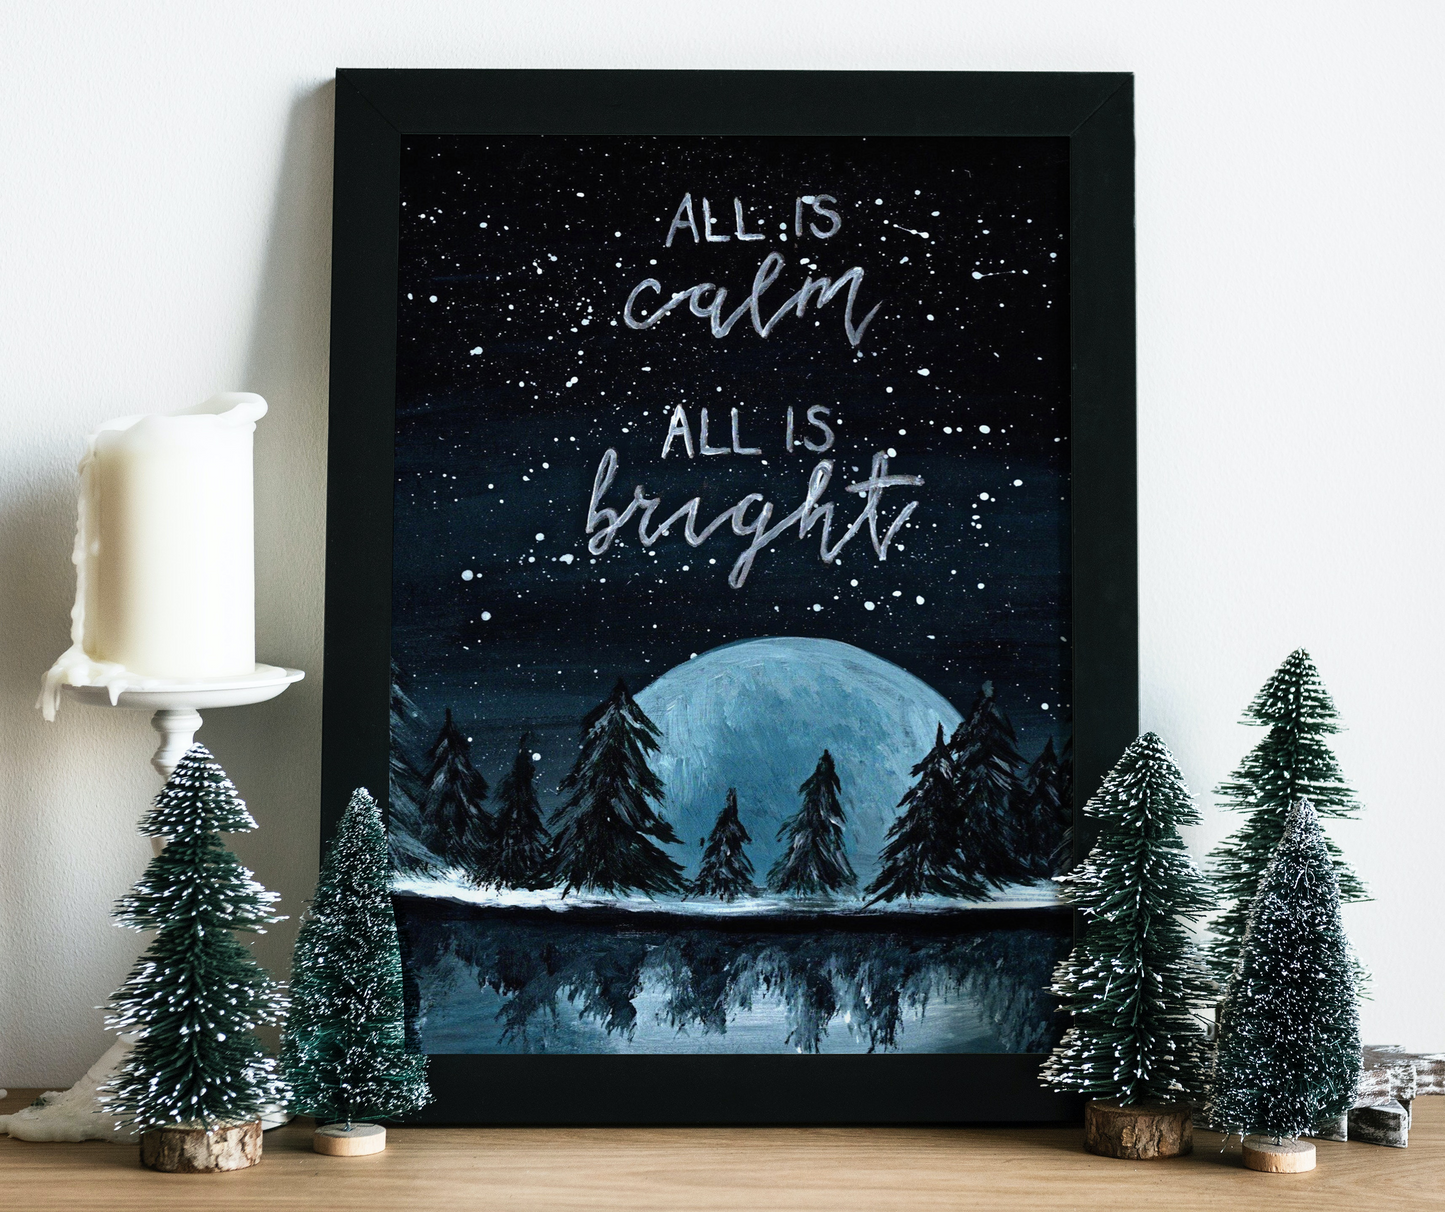 All is calm, All is bright, Silent night Christmas decor, Snowy woodland Christmas print, Christmas tree forest decor, Outdoorsy holiday art